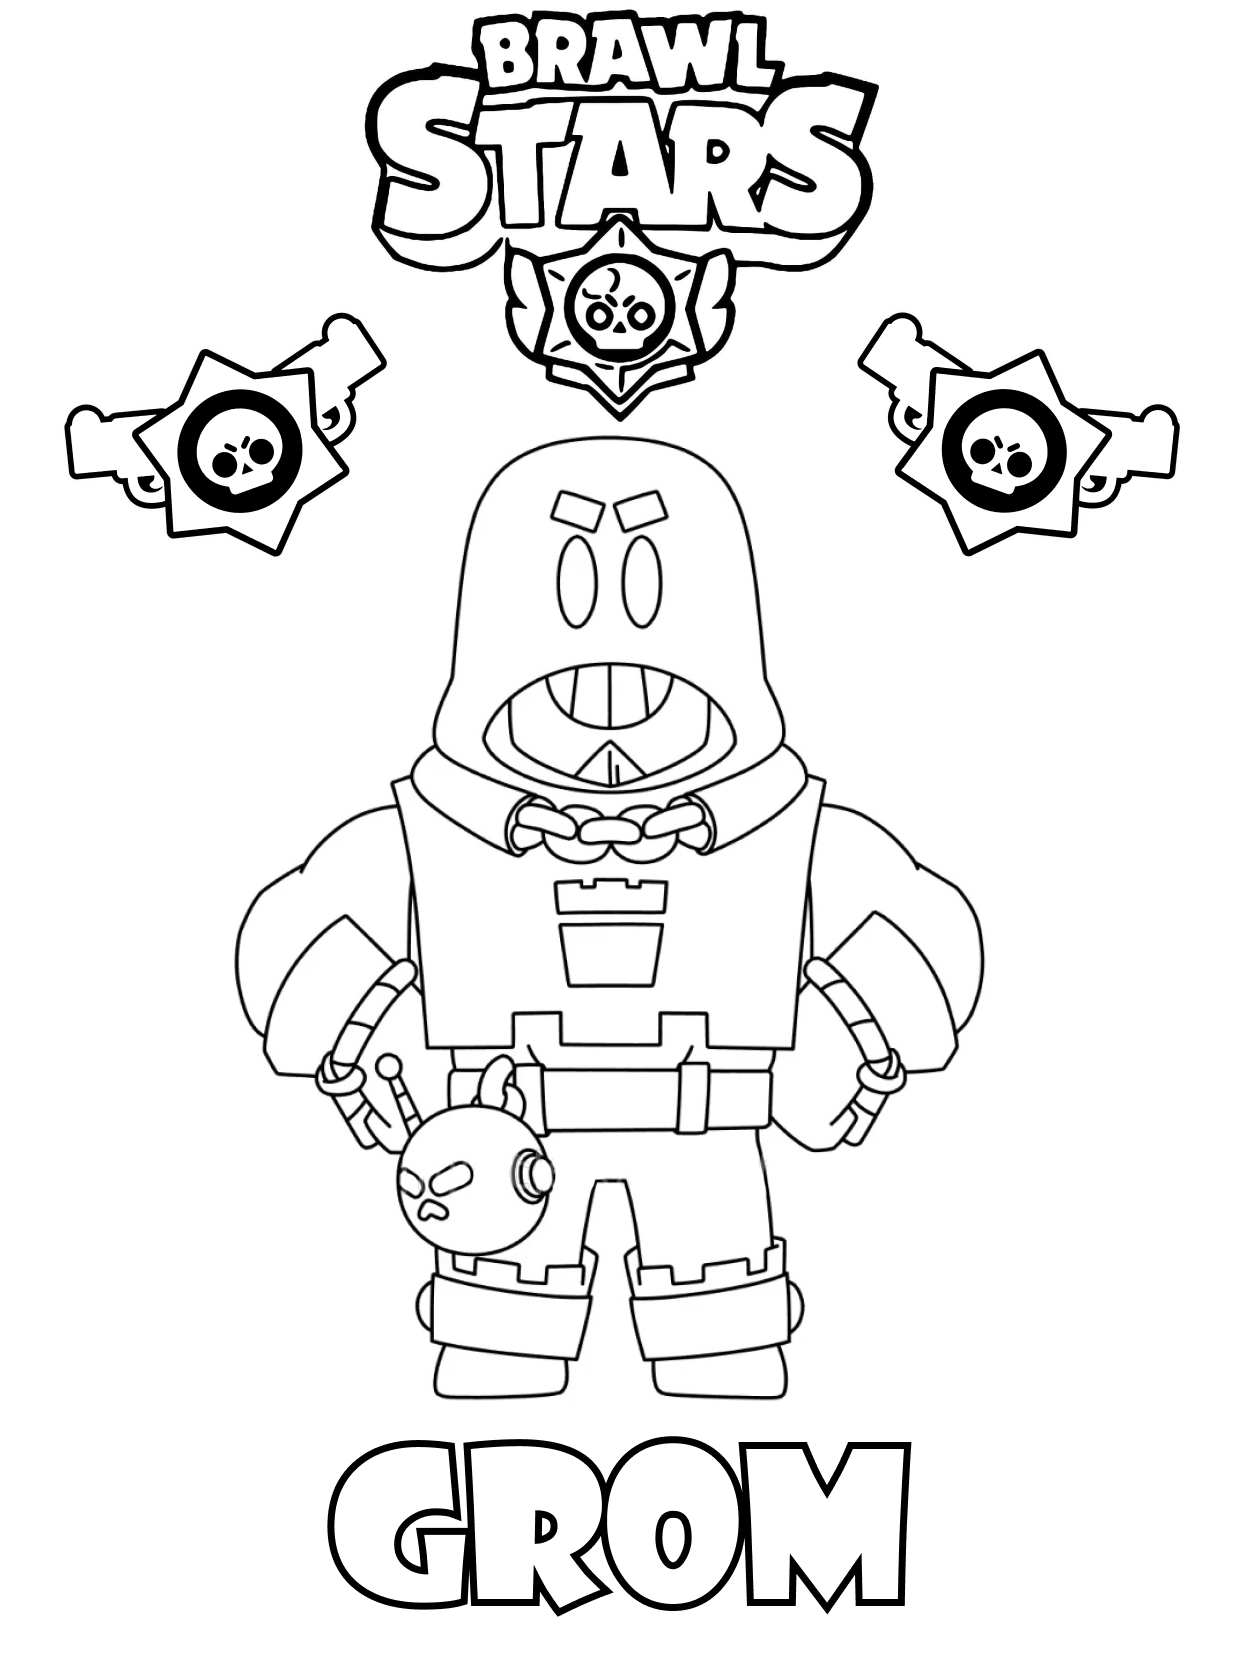 Brawl Stars Grom Coloring Pages - Print Free